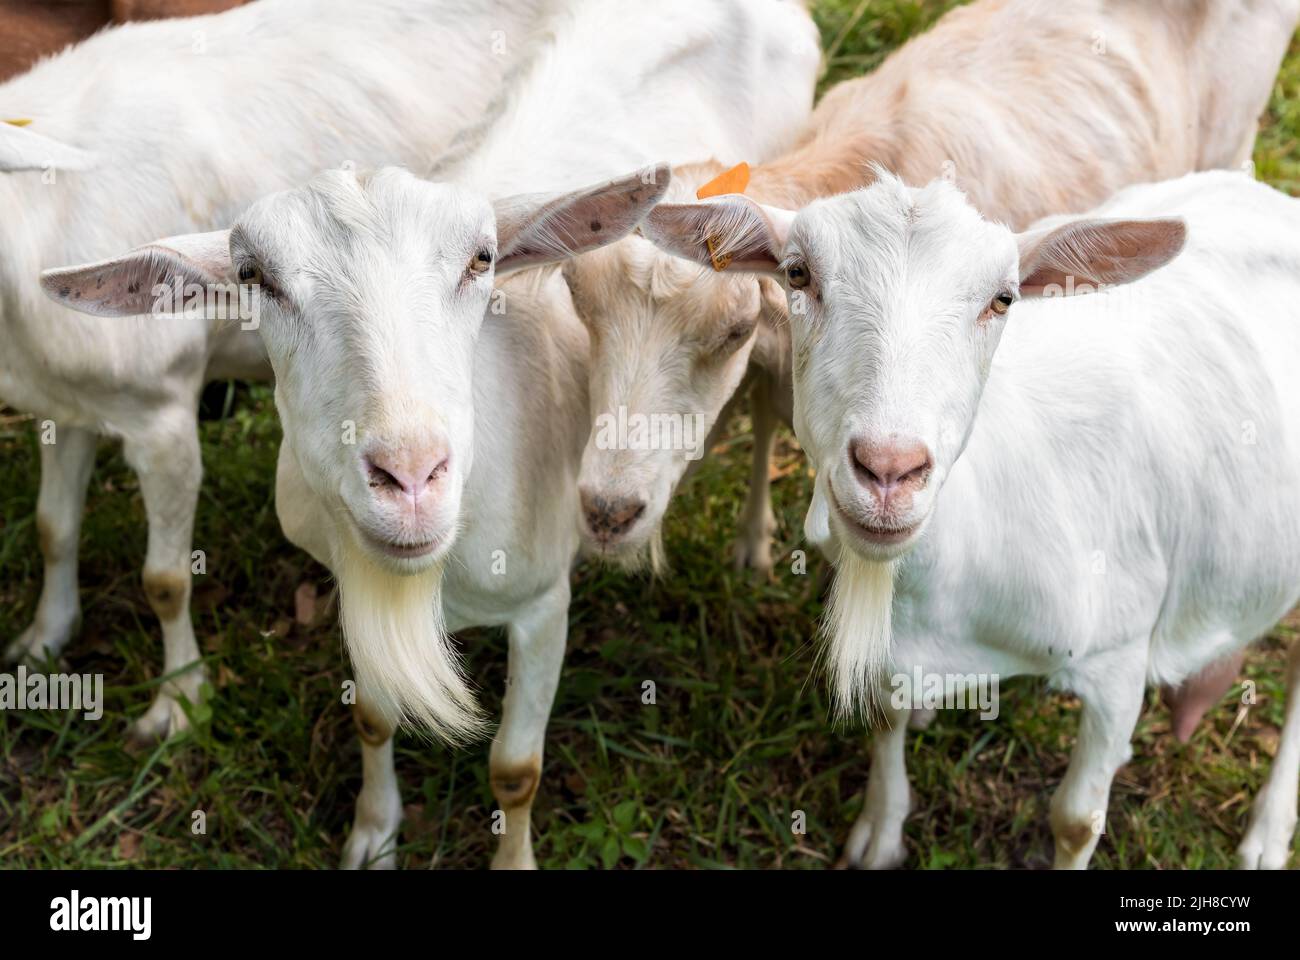 White dairy goats in a pasture meadow at summer hot day. Stock Photo